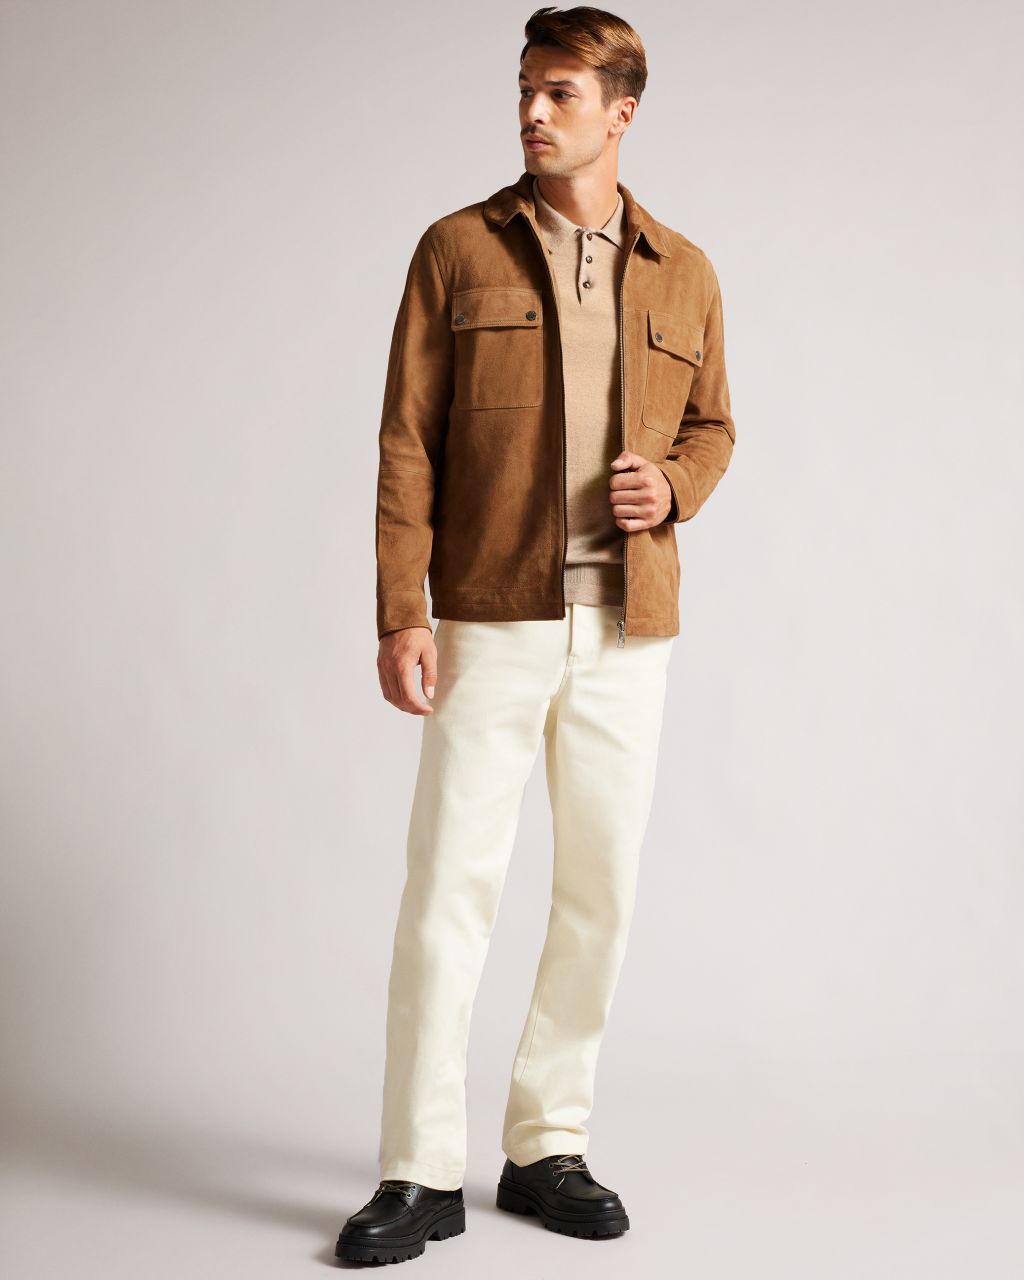 Ted Baker Men's Suede Zip Through Shacket in Camel, Thierry